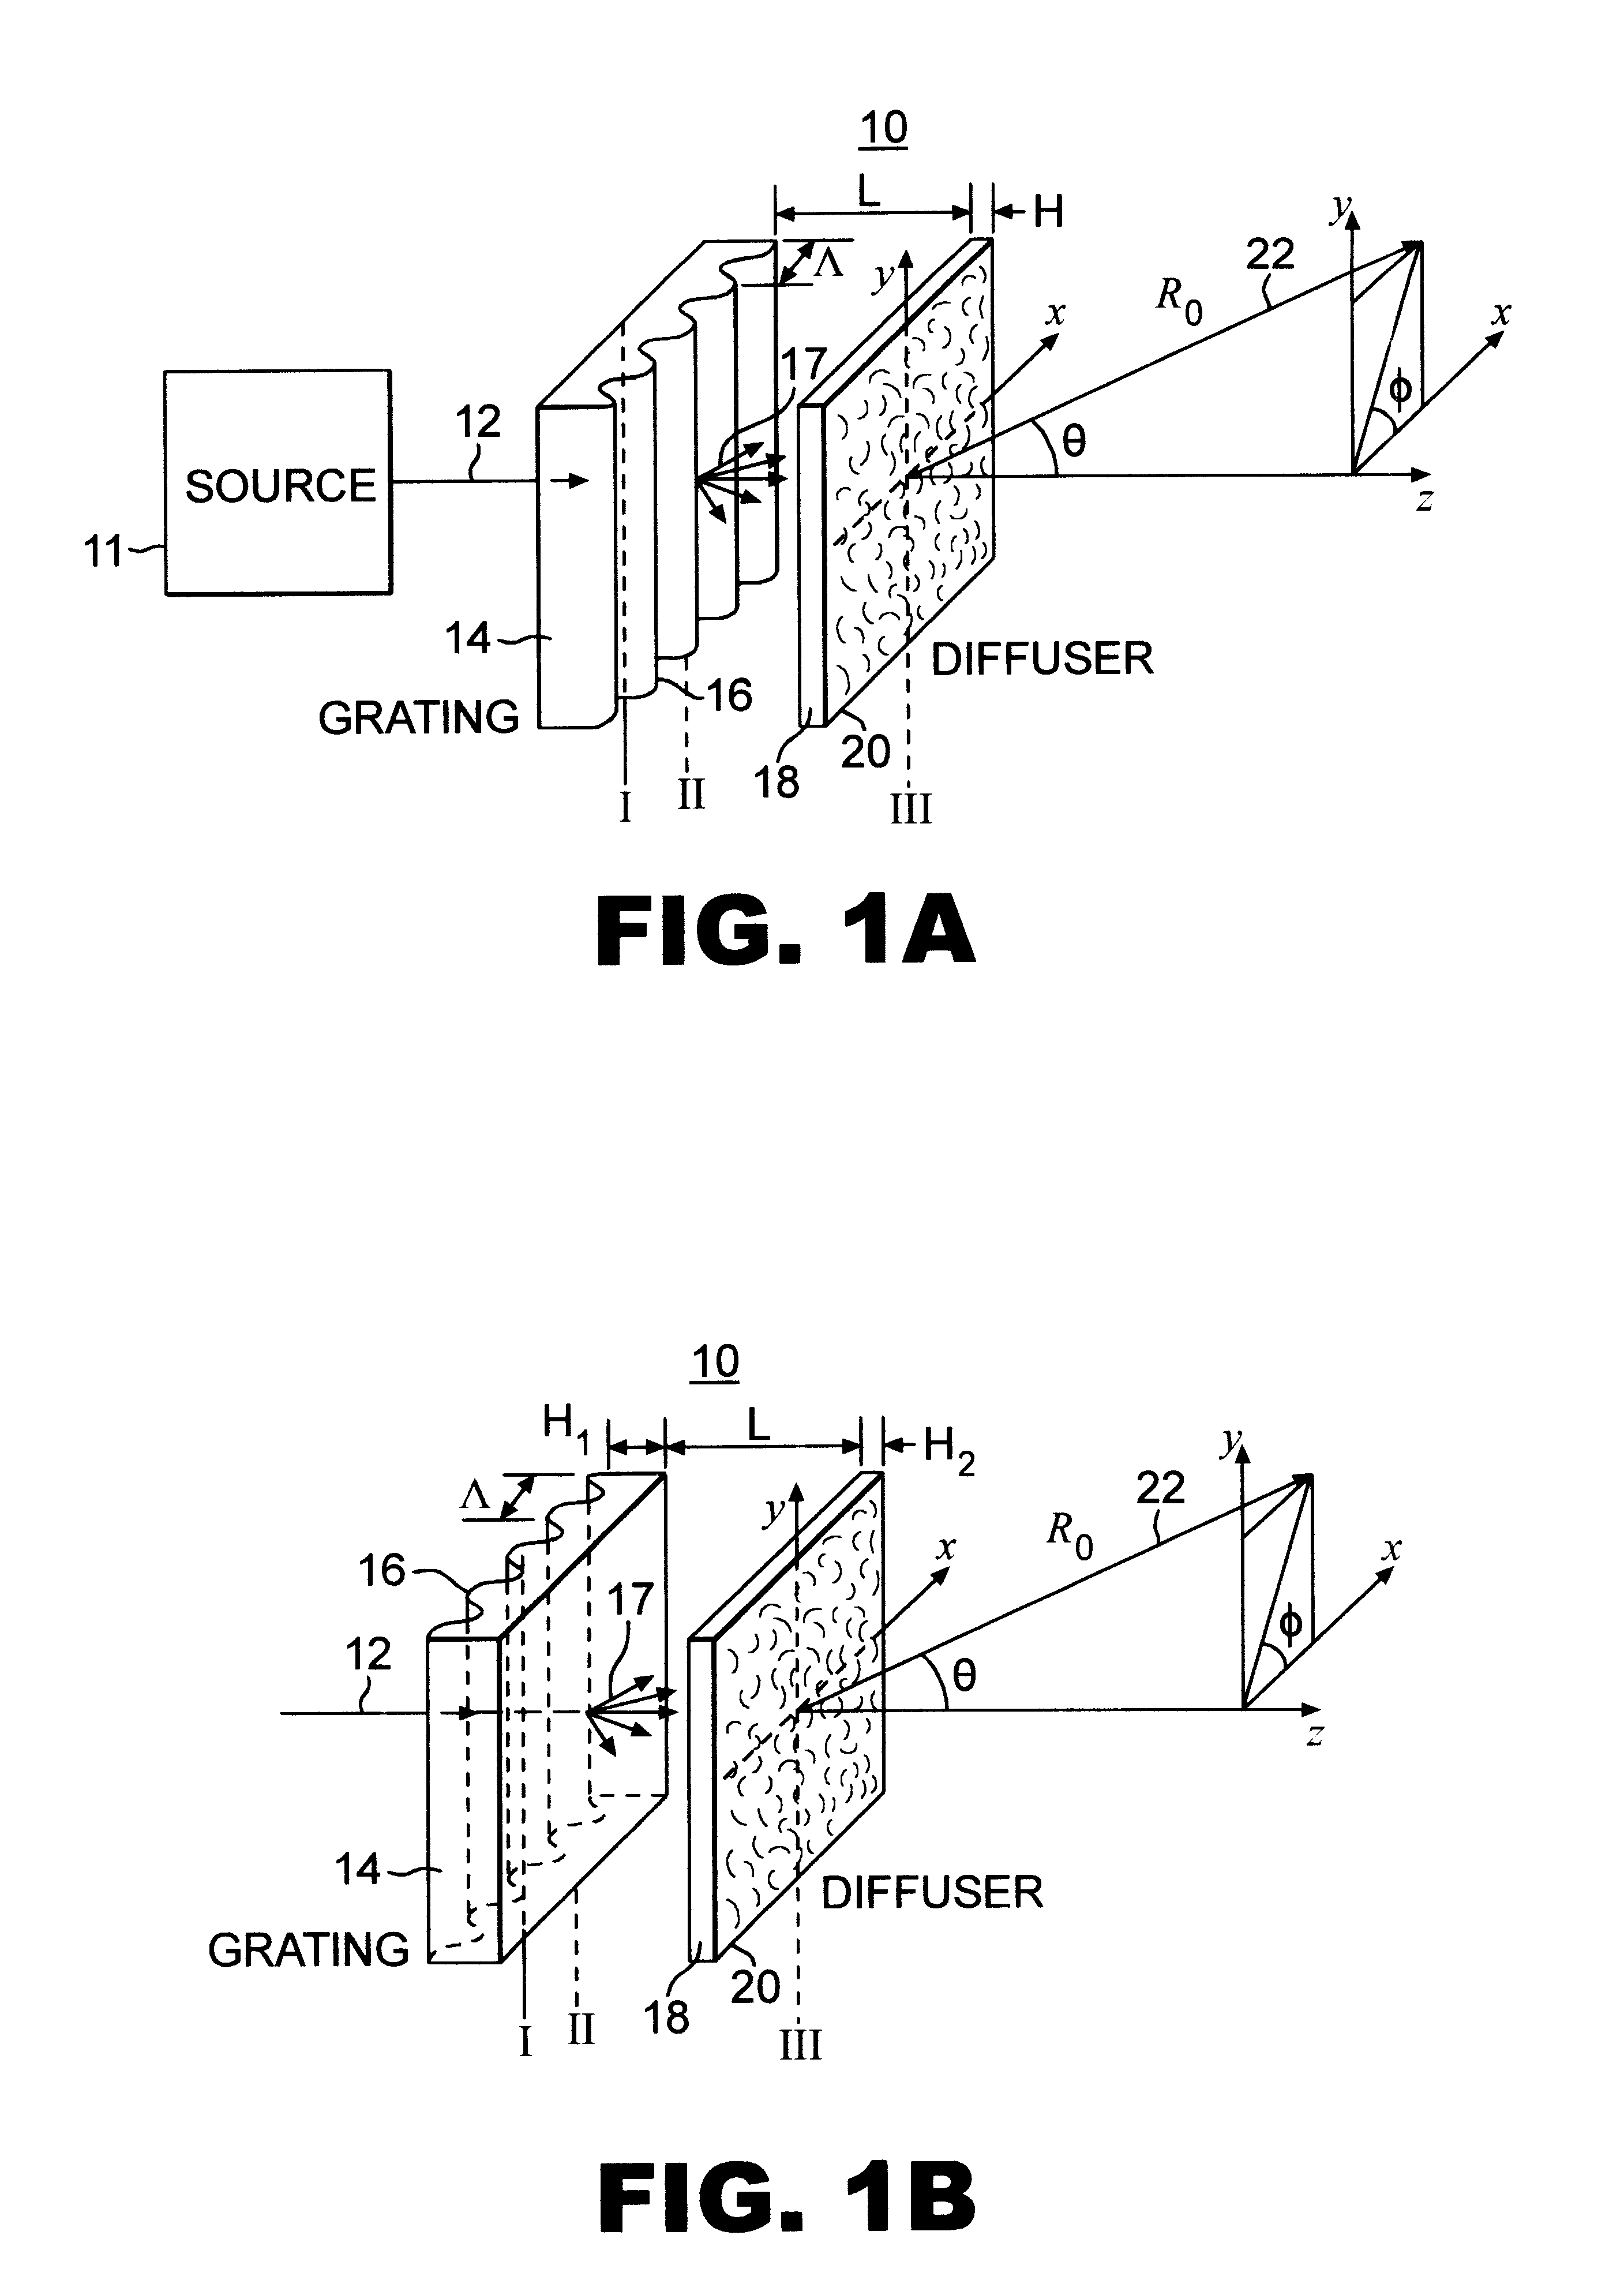 Optical system for diffusing light